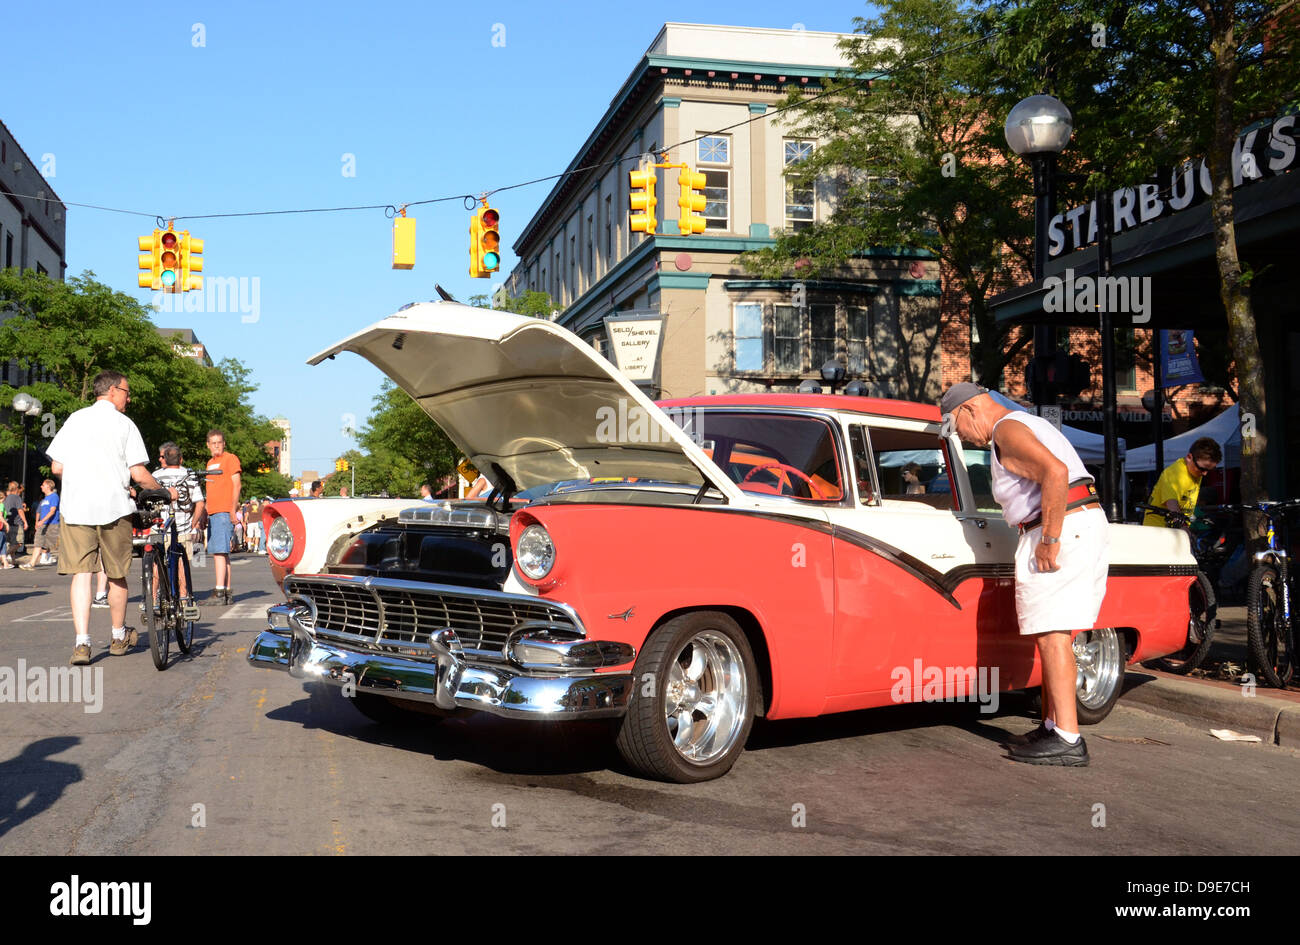 1956 Ford Fairlane at the Rolling Sculpture car show July 13, 2012 in Ann Arbor, Michigan Stock Photo